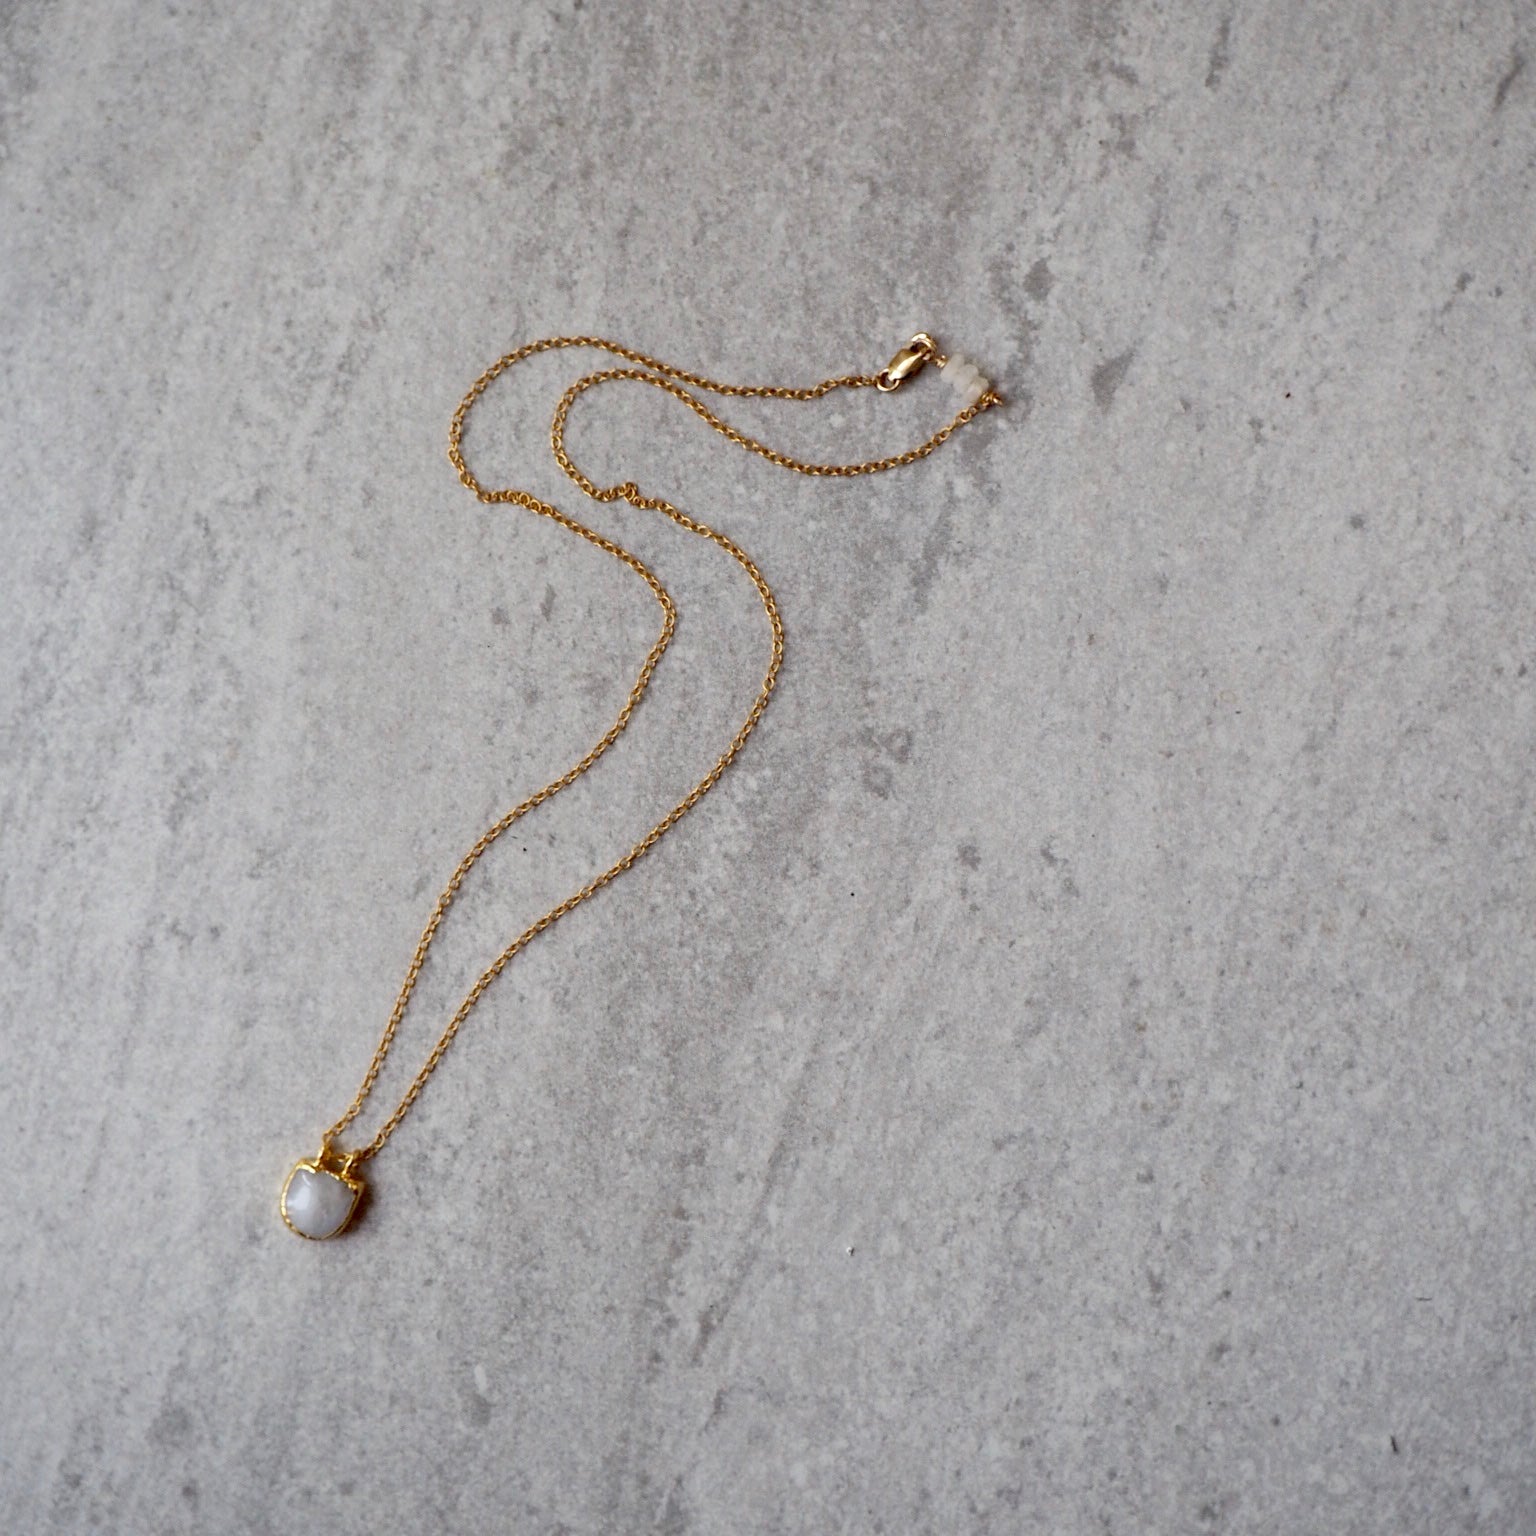 Delicate gold chain necklace with Moonstone by Wallis Designs